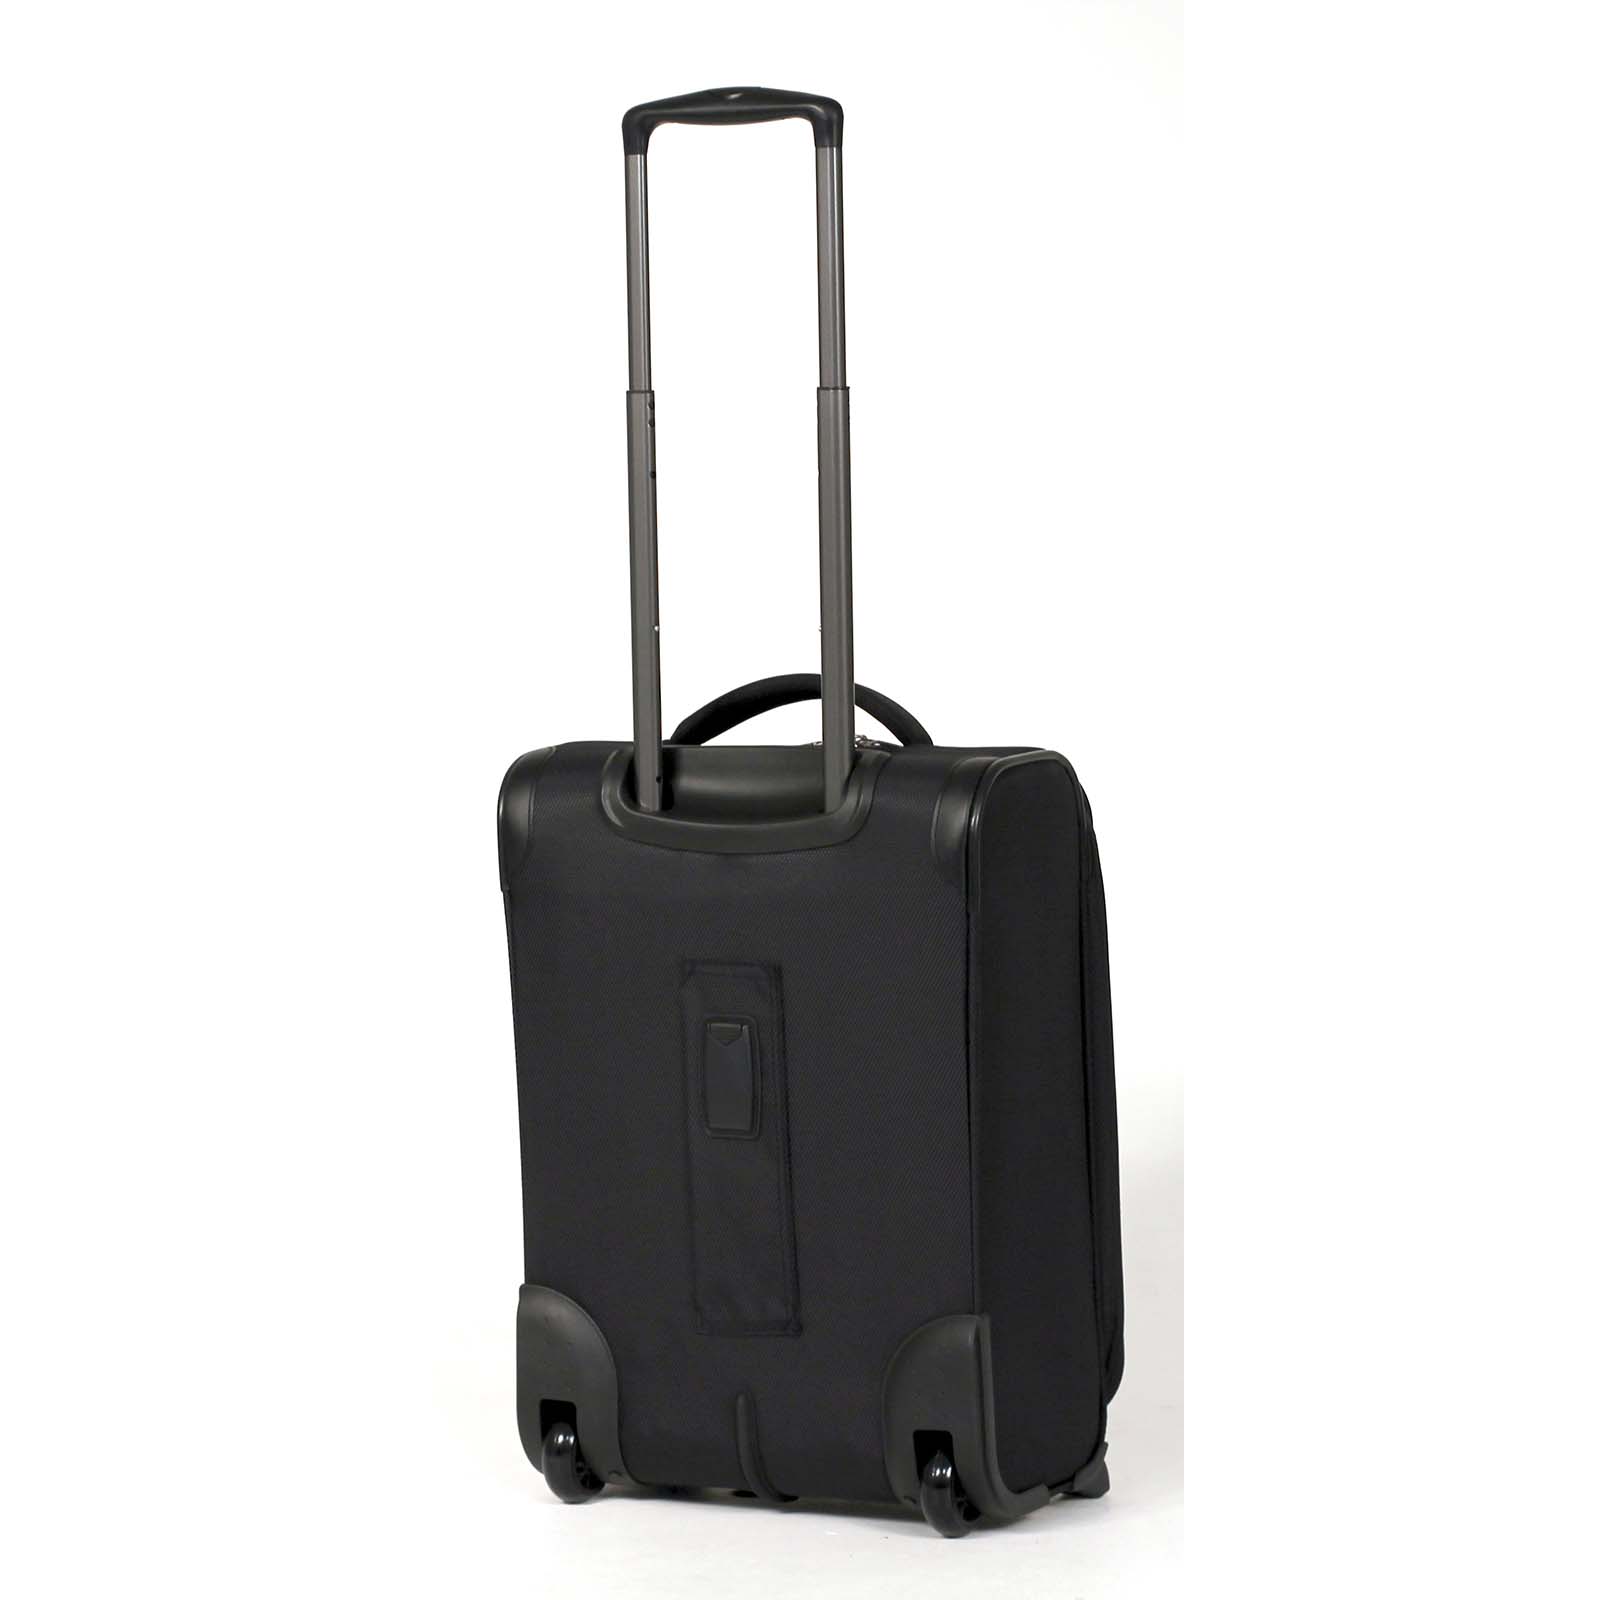 tosca-so-lite-2-wheel-carry-on-suitcase-black-back